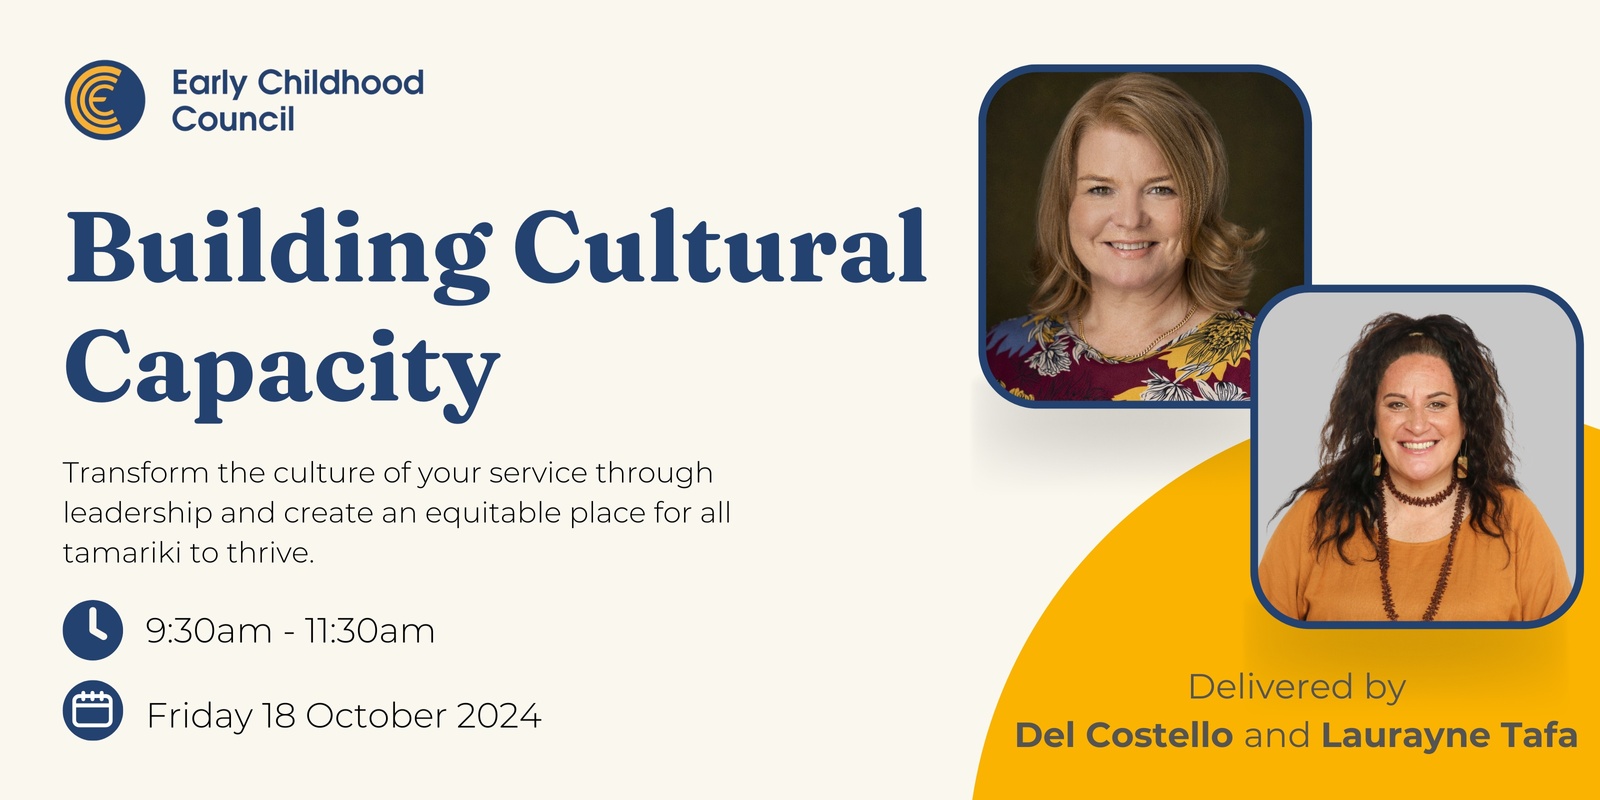 Banner image for Building Cultural Capability